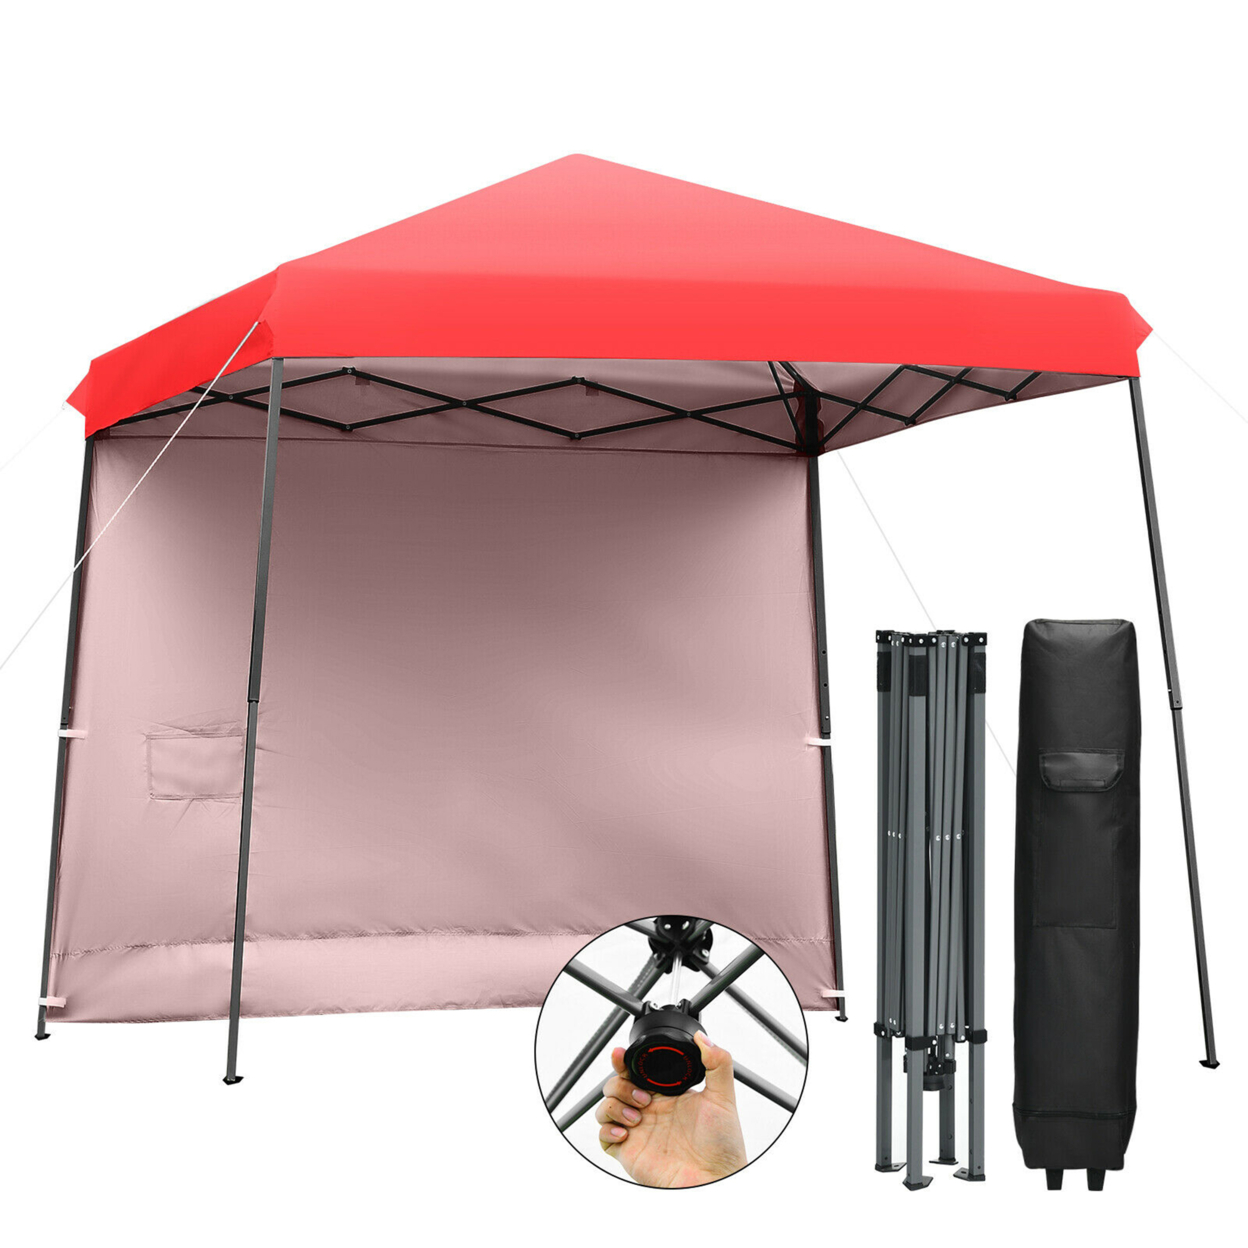 10ft X 10ft Pop Up Tent Slant Leg Canopy W/ Roll-up Side Wall - Red